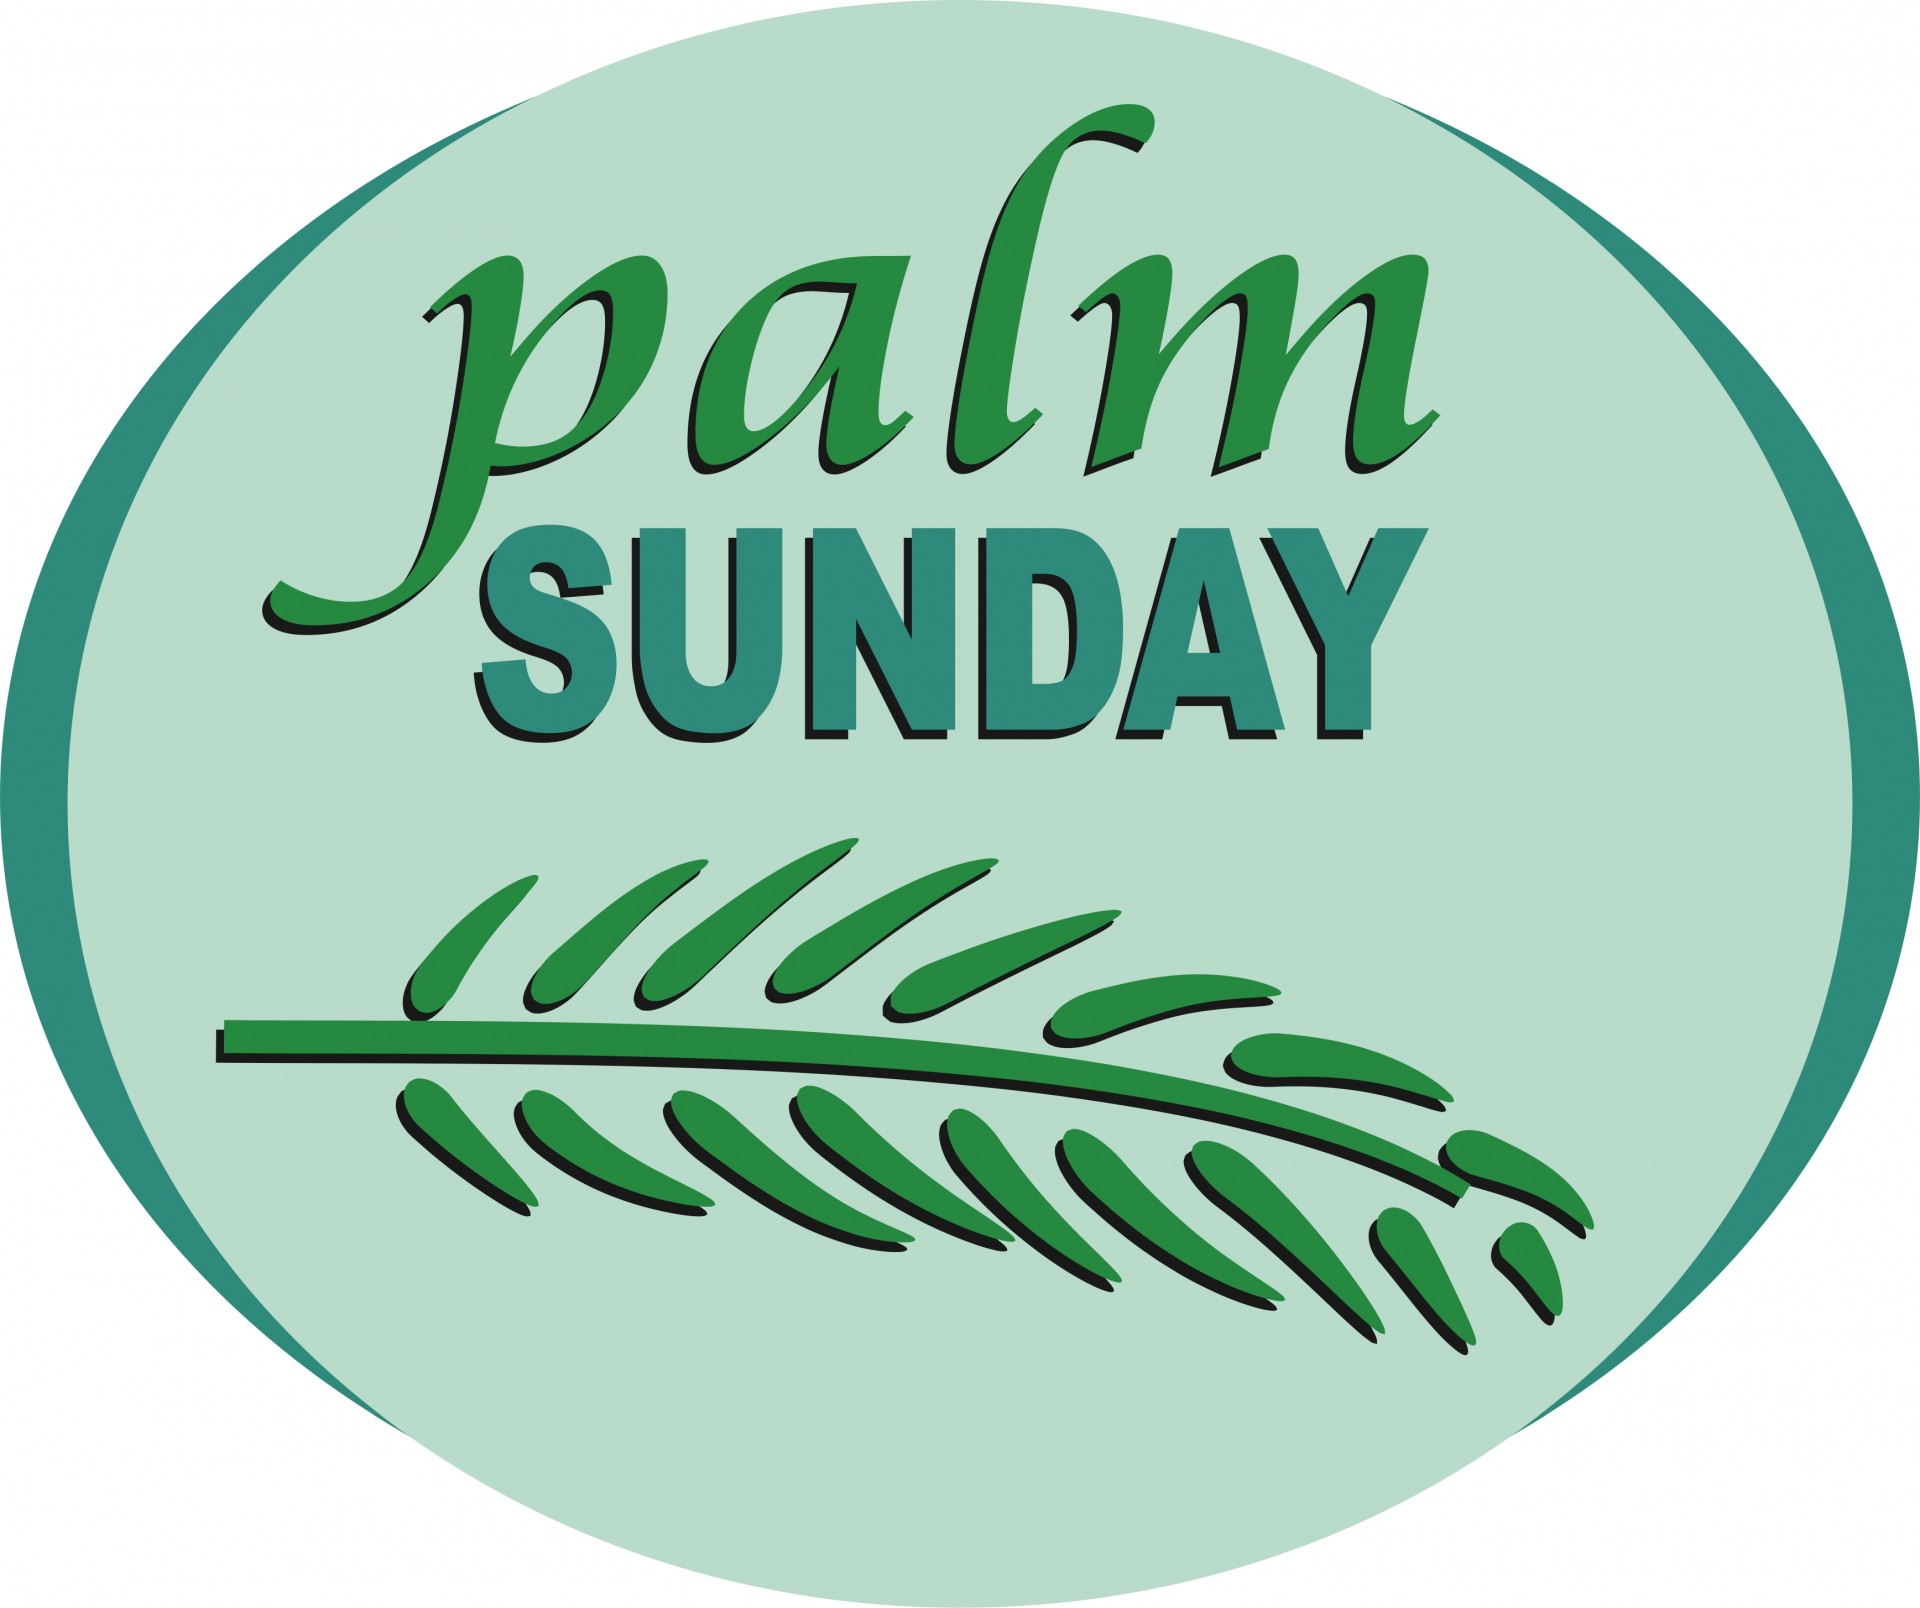 free christian clipart for easter sunday - photo #23